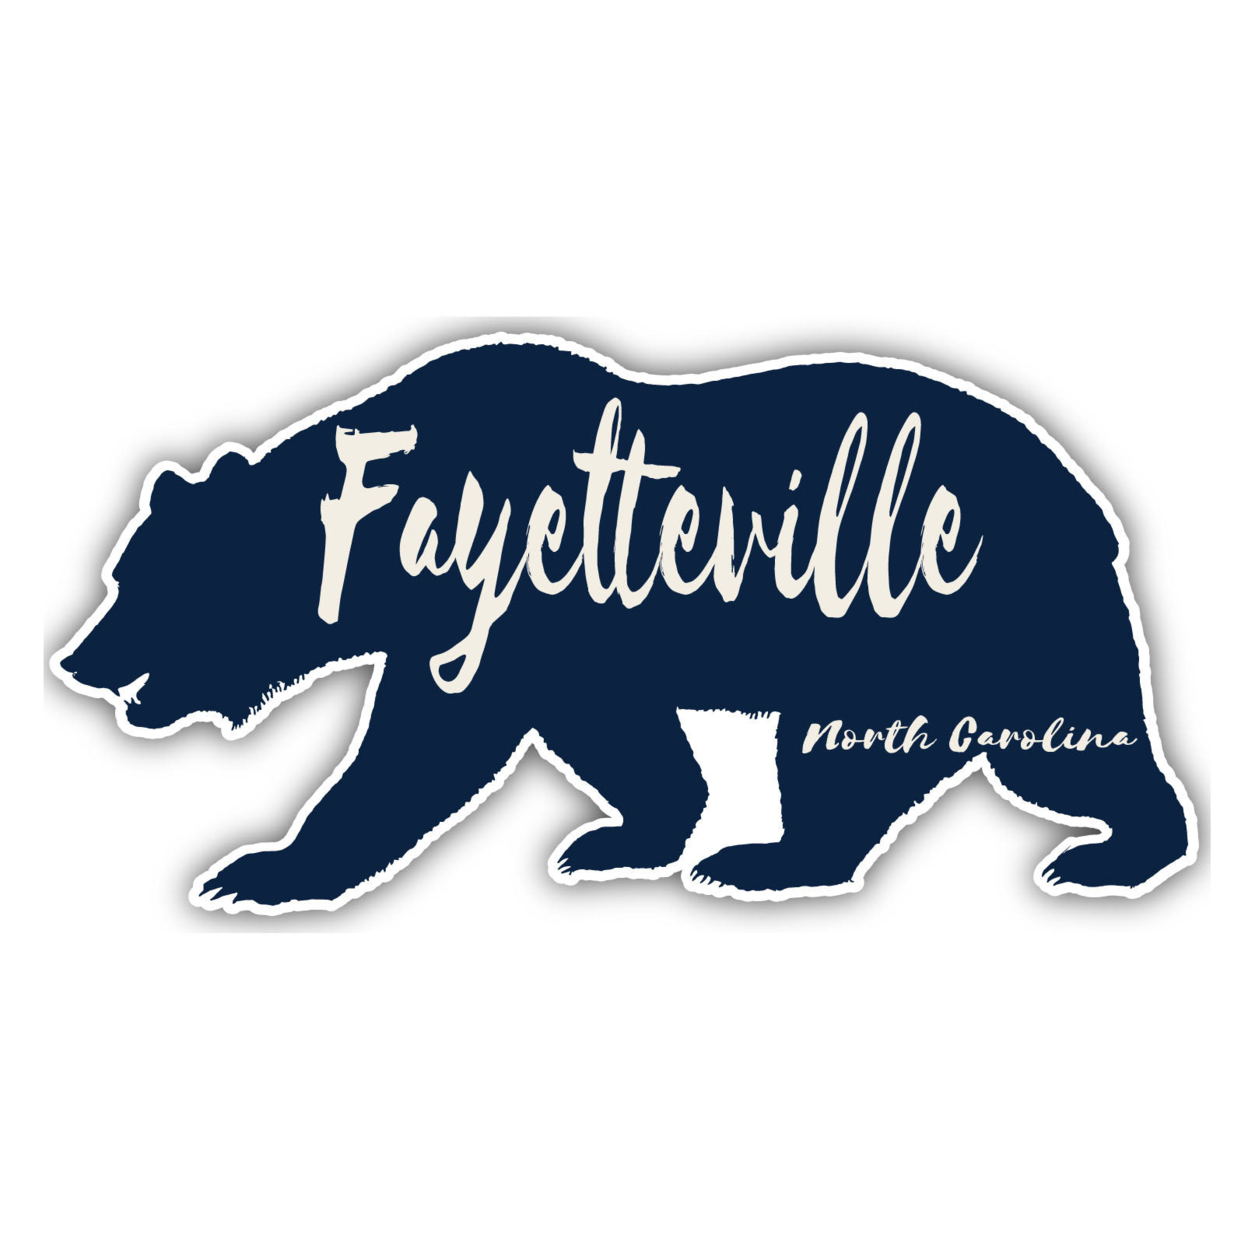 Fayetteville North Carolina Souvenir Decorative Stickers (Choose Theme And Size) - 4-Pack, 10-Inch, Tent